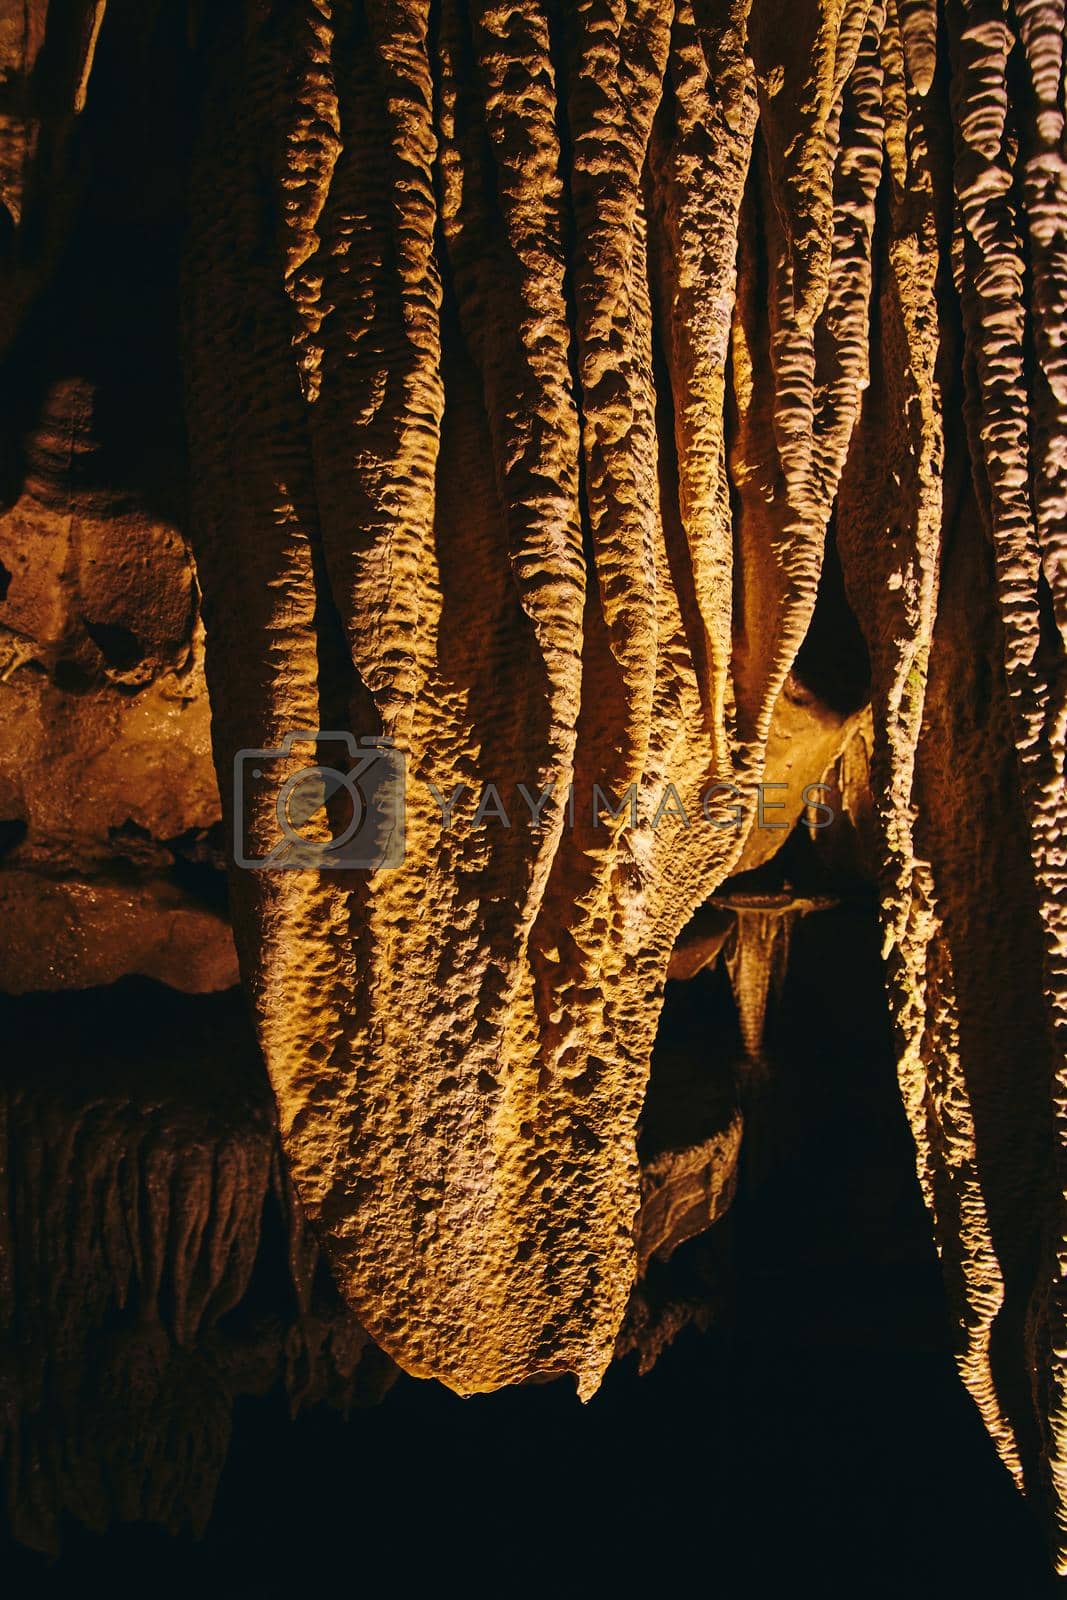 Royalty free image of Close up shot of cave formations underground stalagmites and stalactites by njproductions